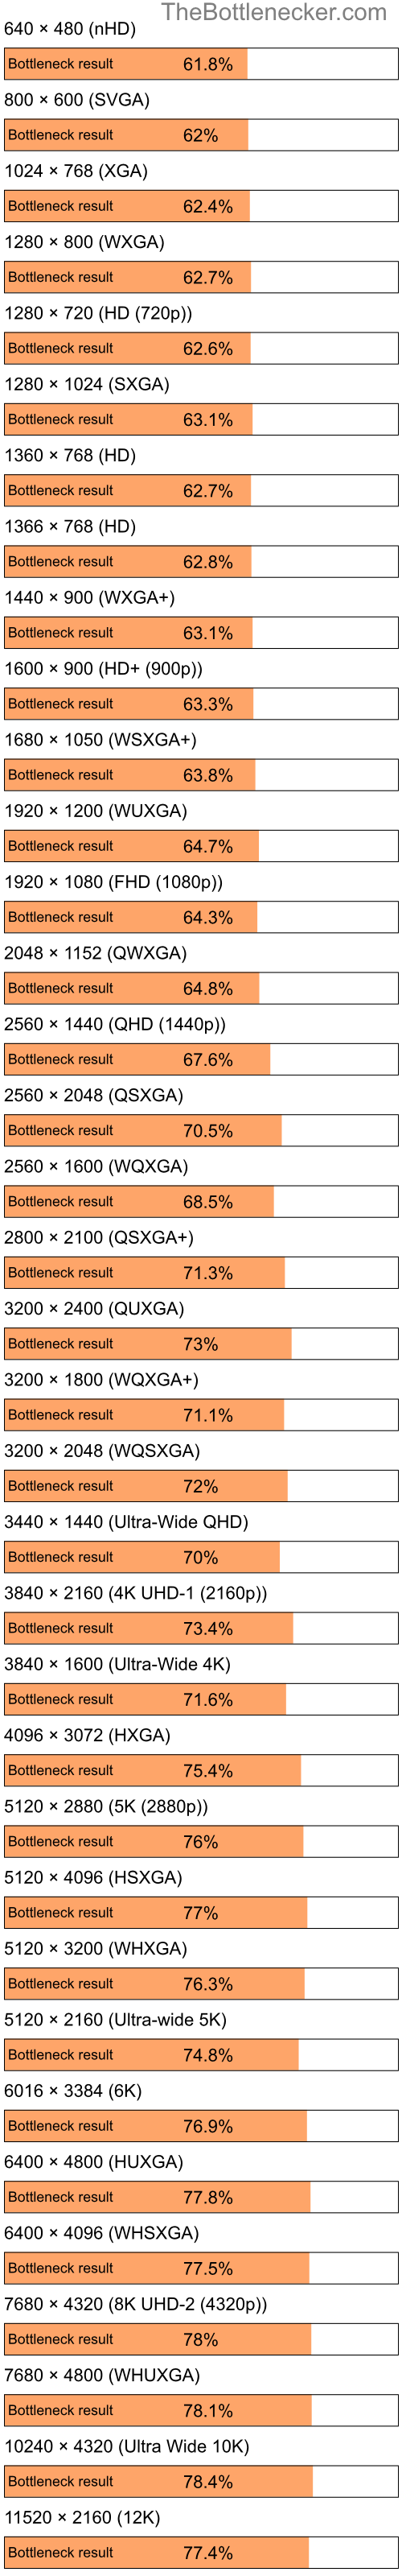 Bottleneck results by resolution for Intel Pentium 4 and AMD Mobility Radeon HD 2400 in7 Days to Die